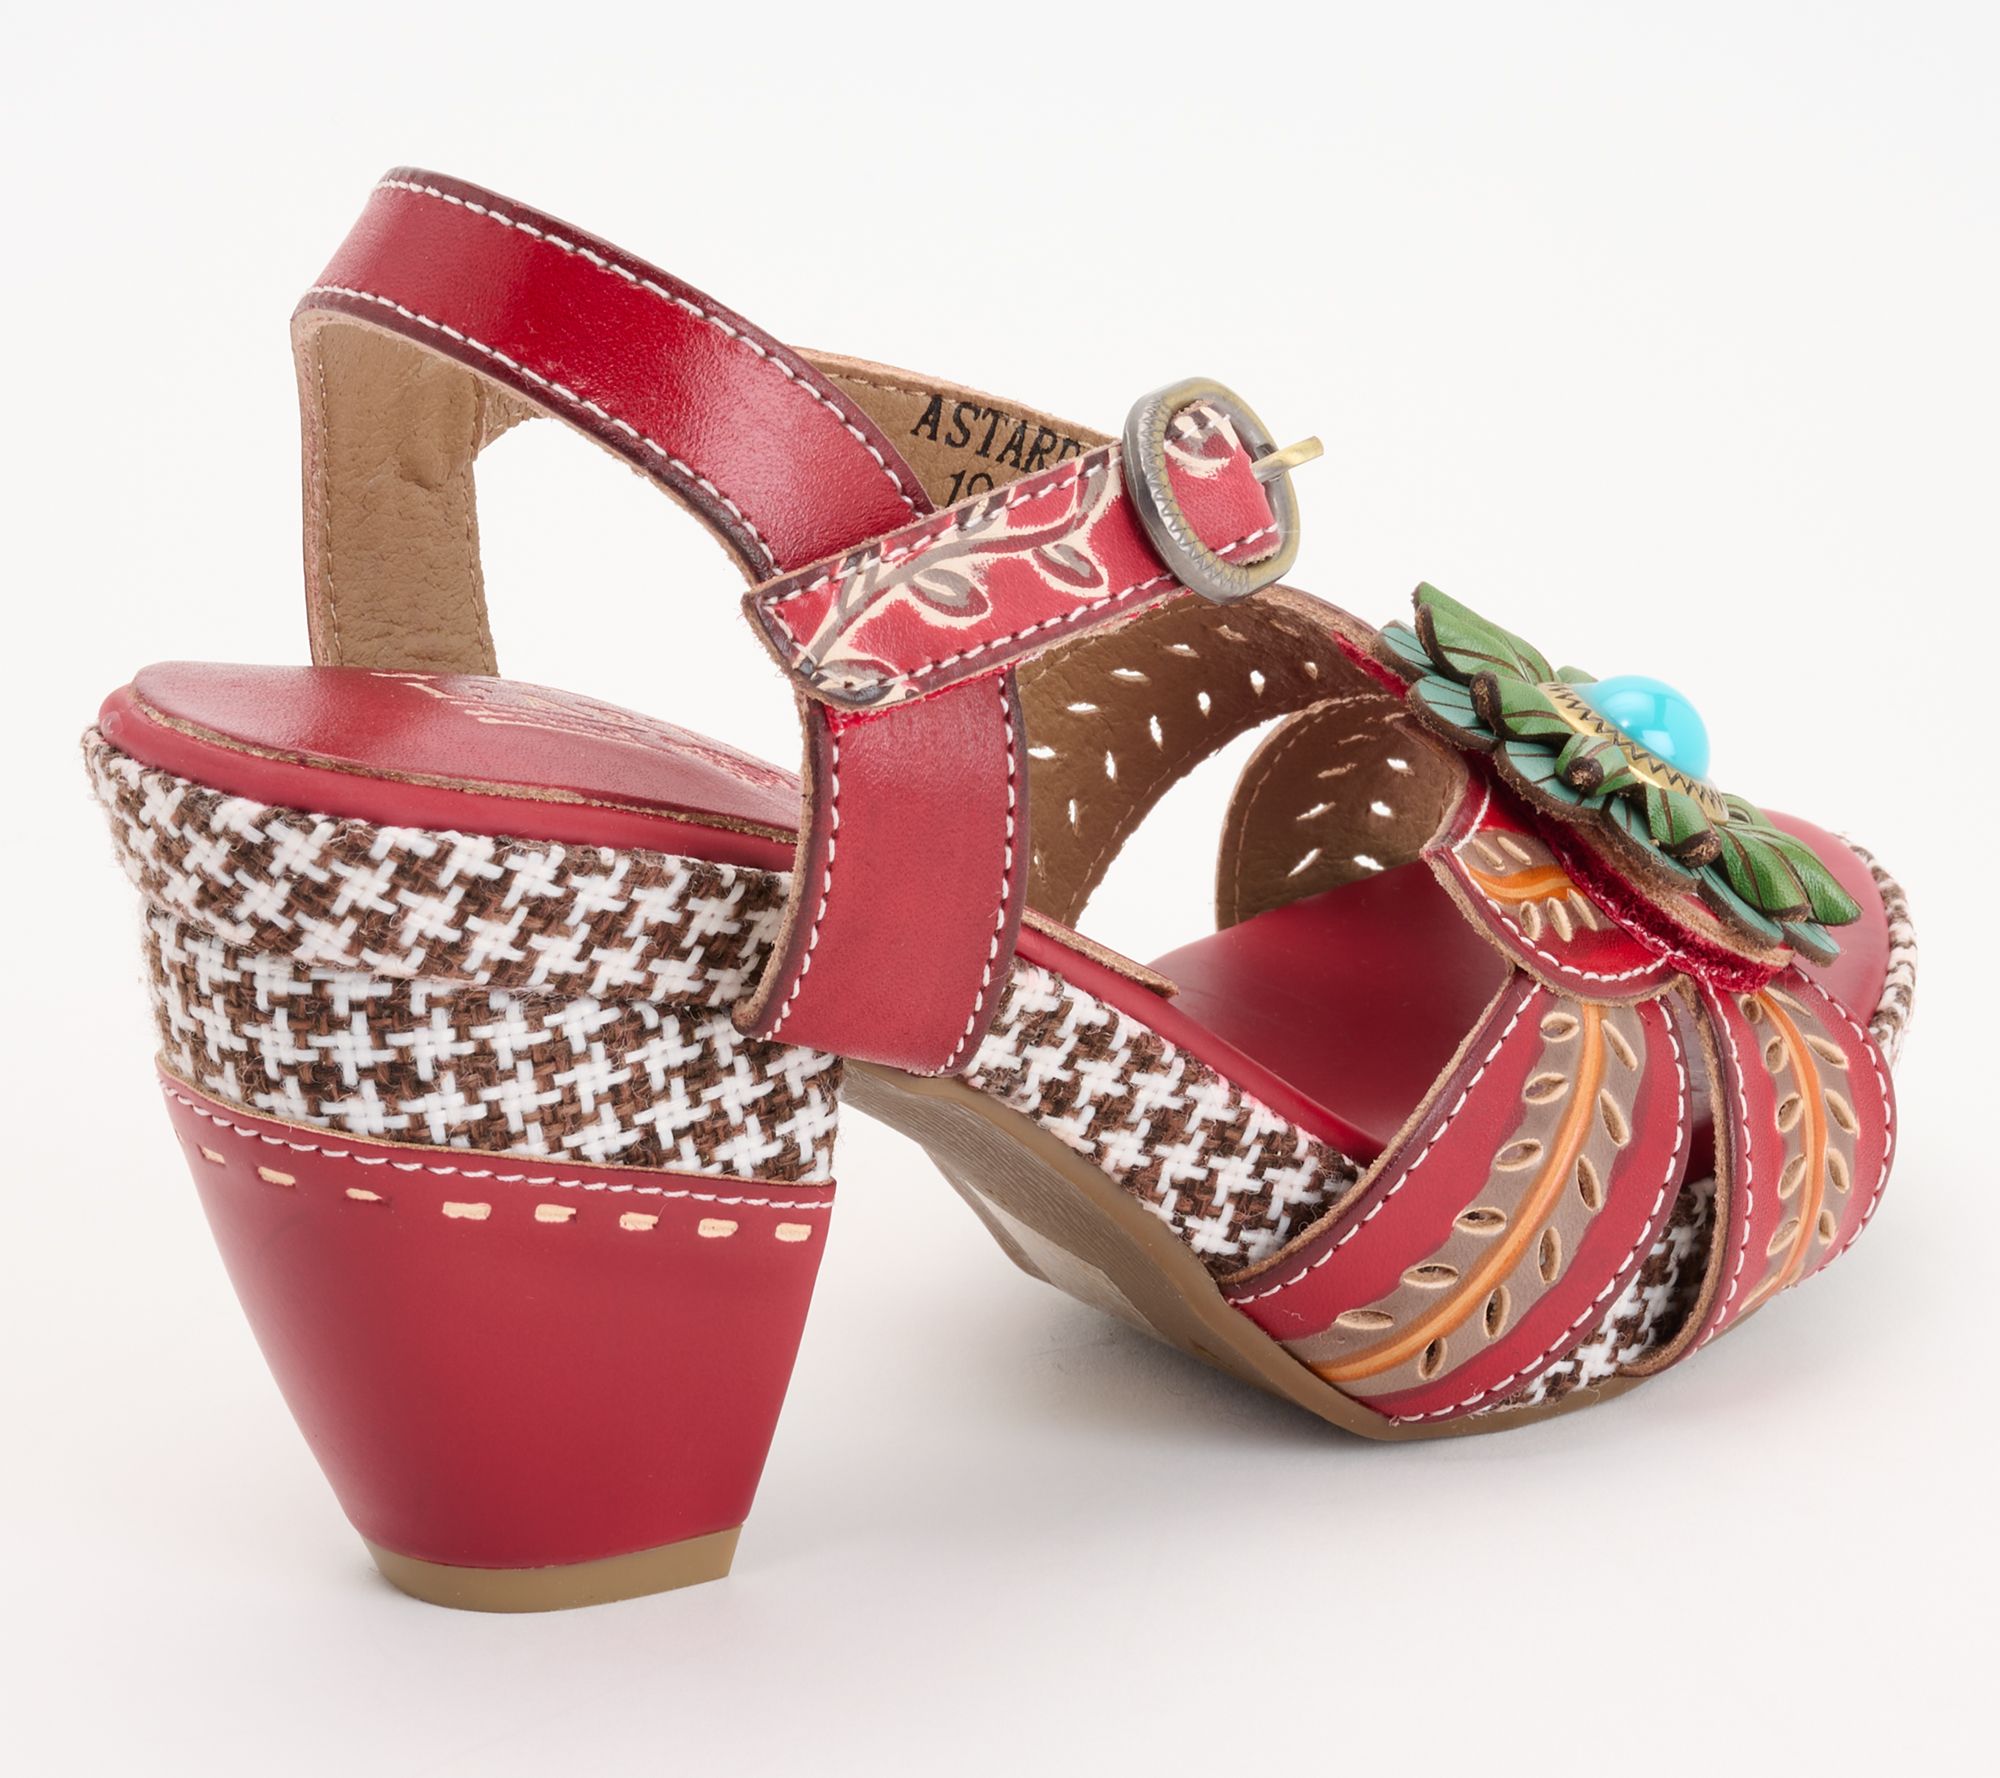 L'Artiste by Spring Step Leather Heeled Sandals - Astarr - QVC.com